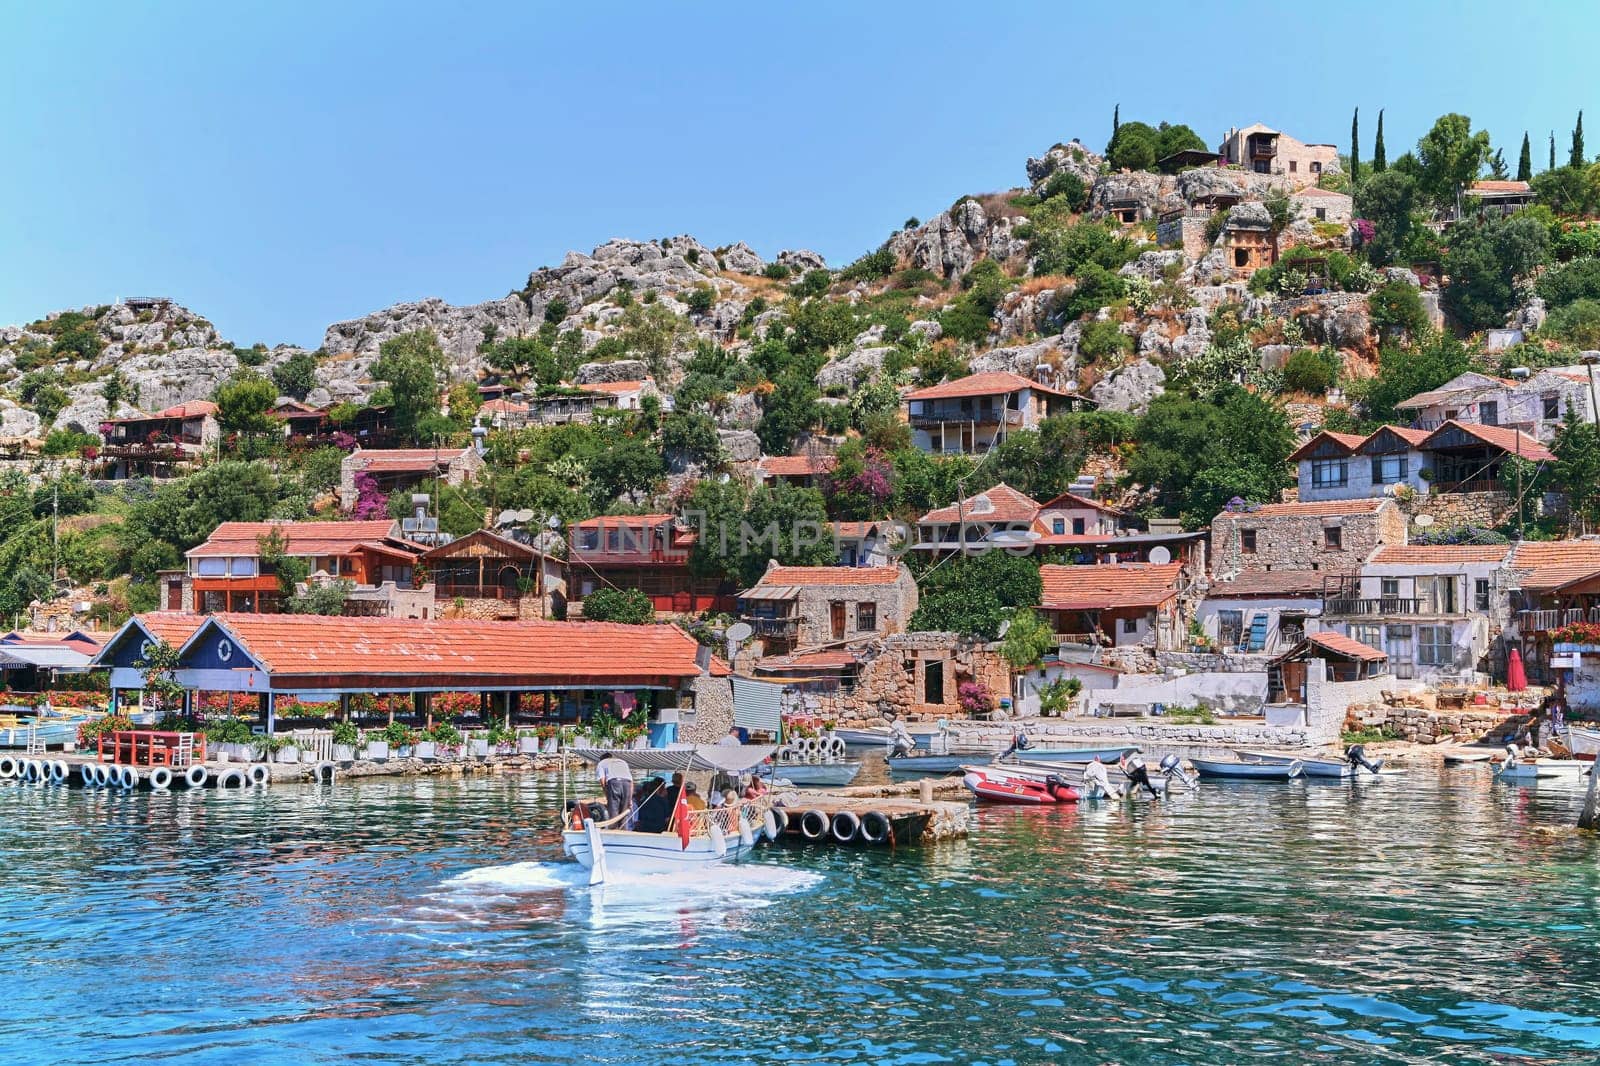 Scenic Turkish Village on Hill Overlooking Boats in Crystal Blue Sea by Hil